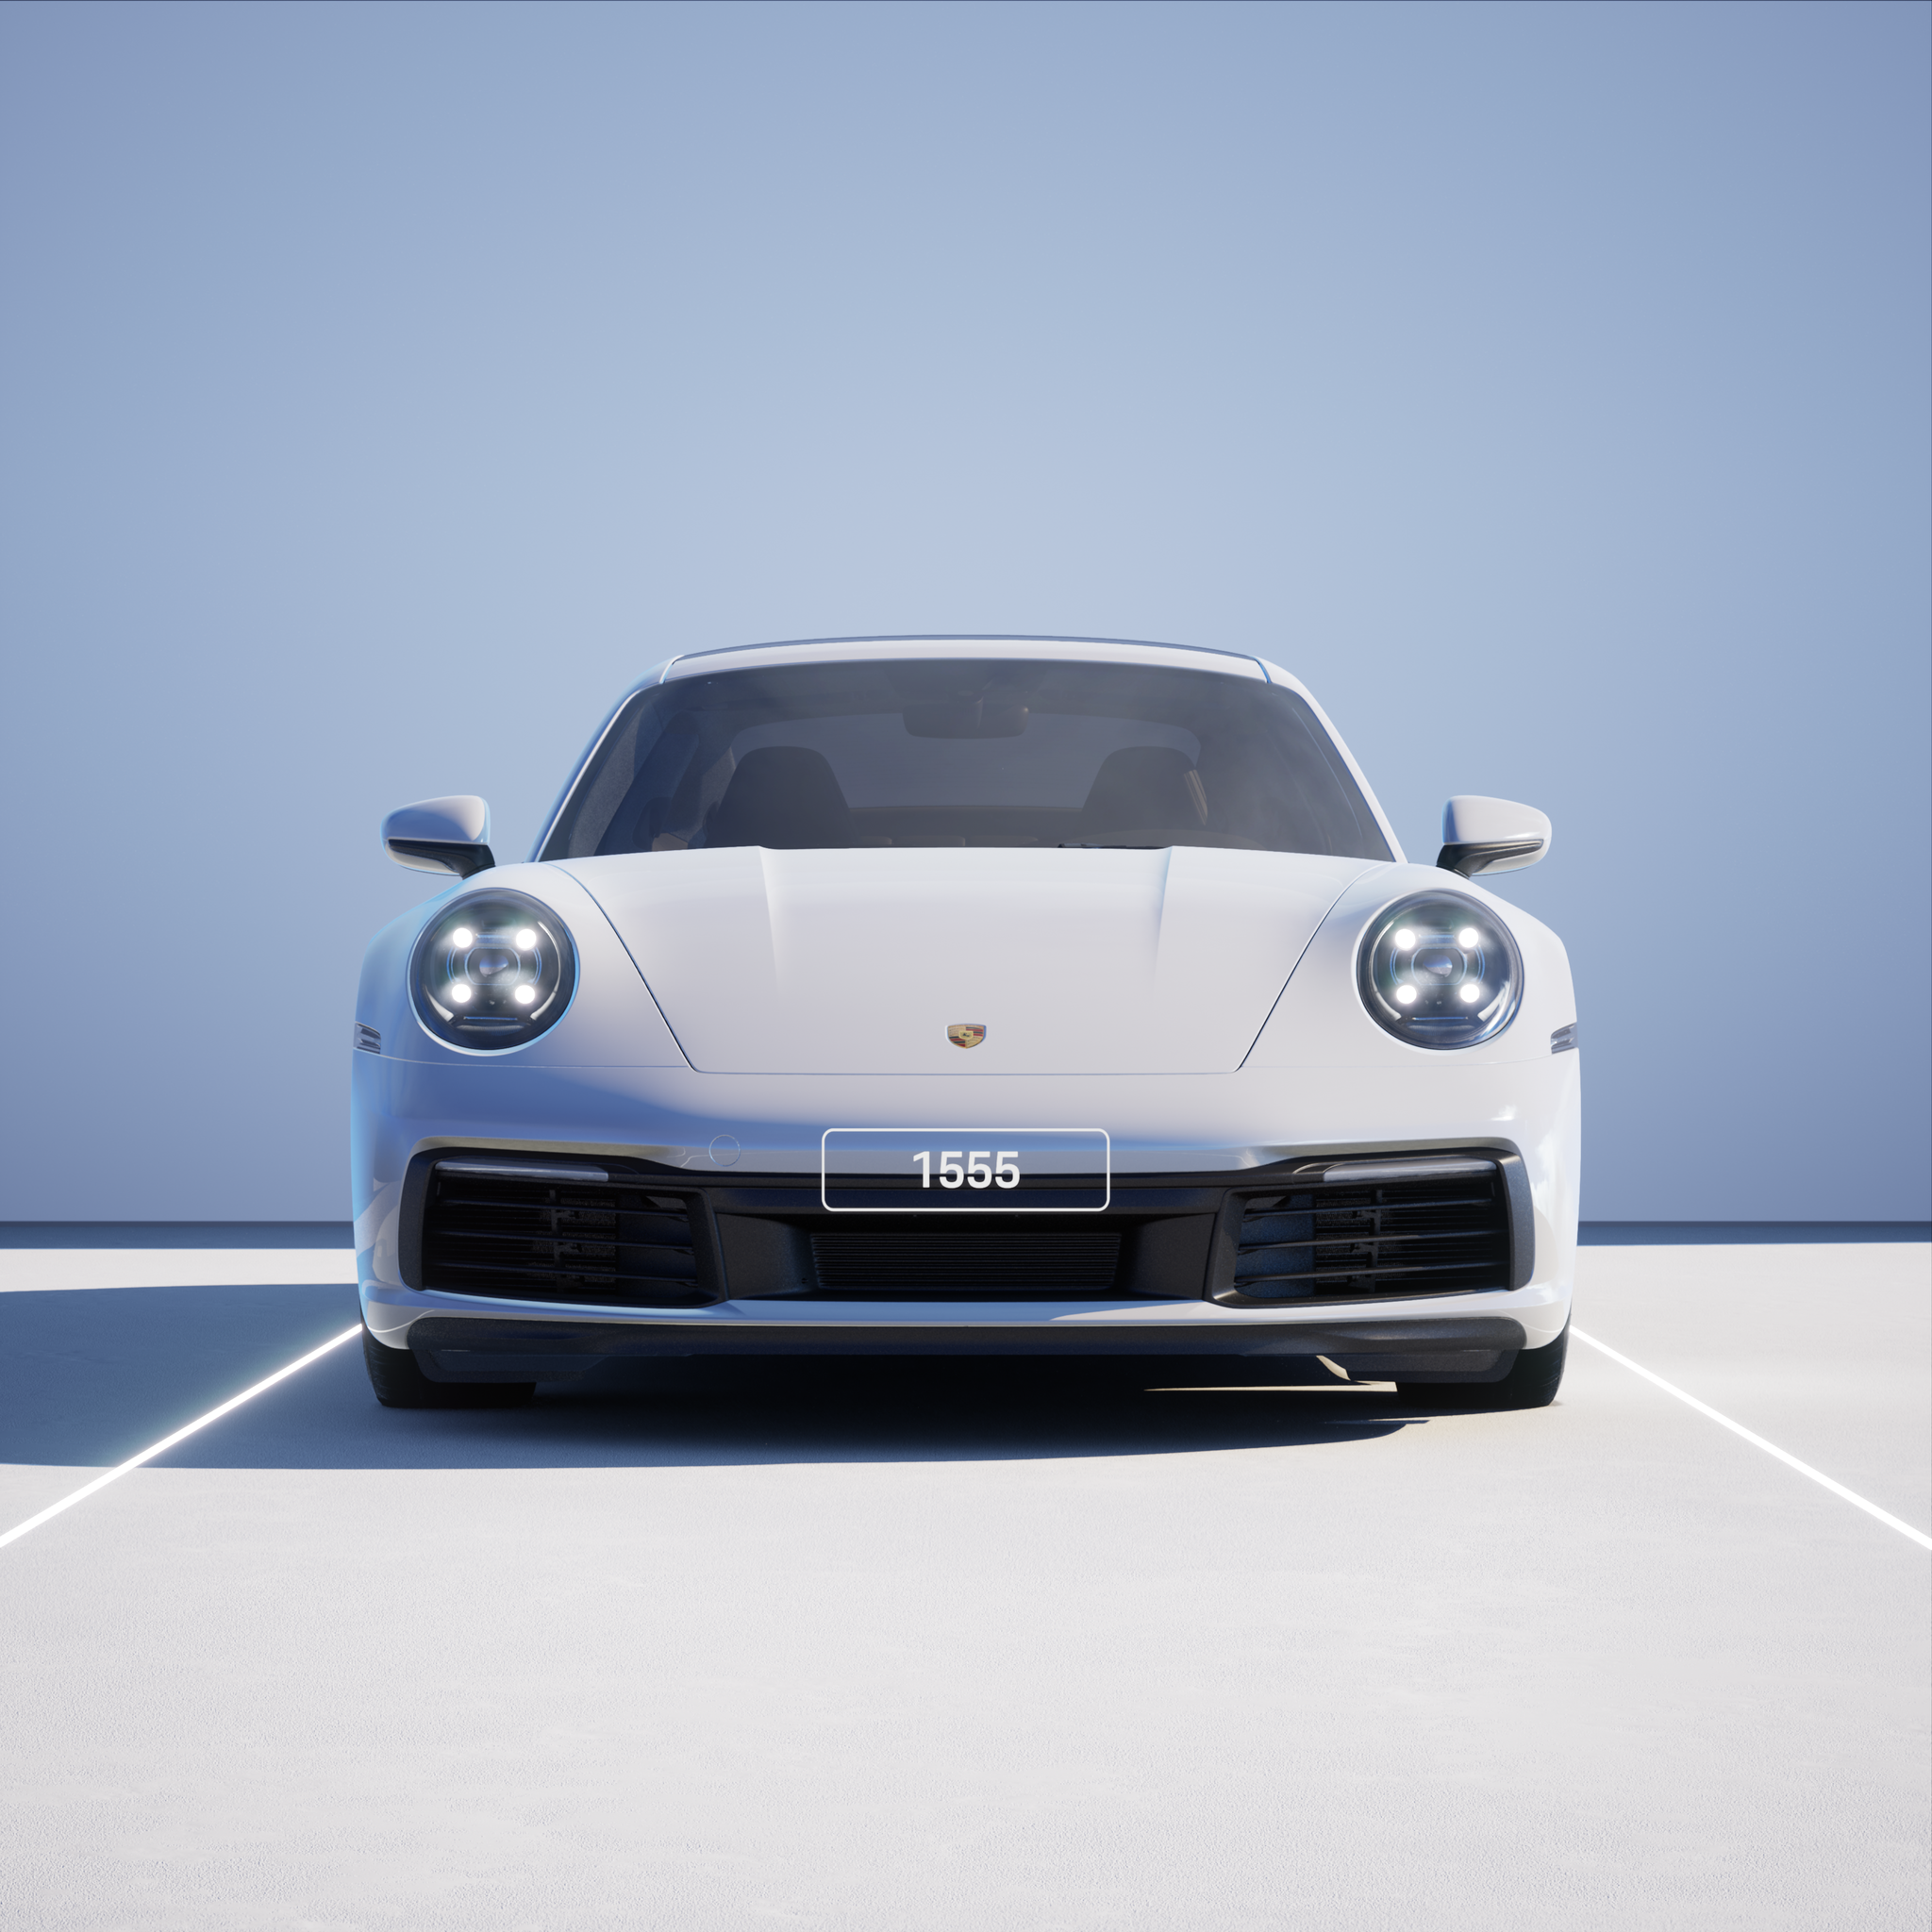 The PORSCHΞ 911 1555 image in phase